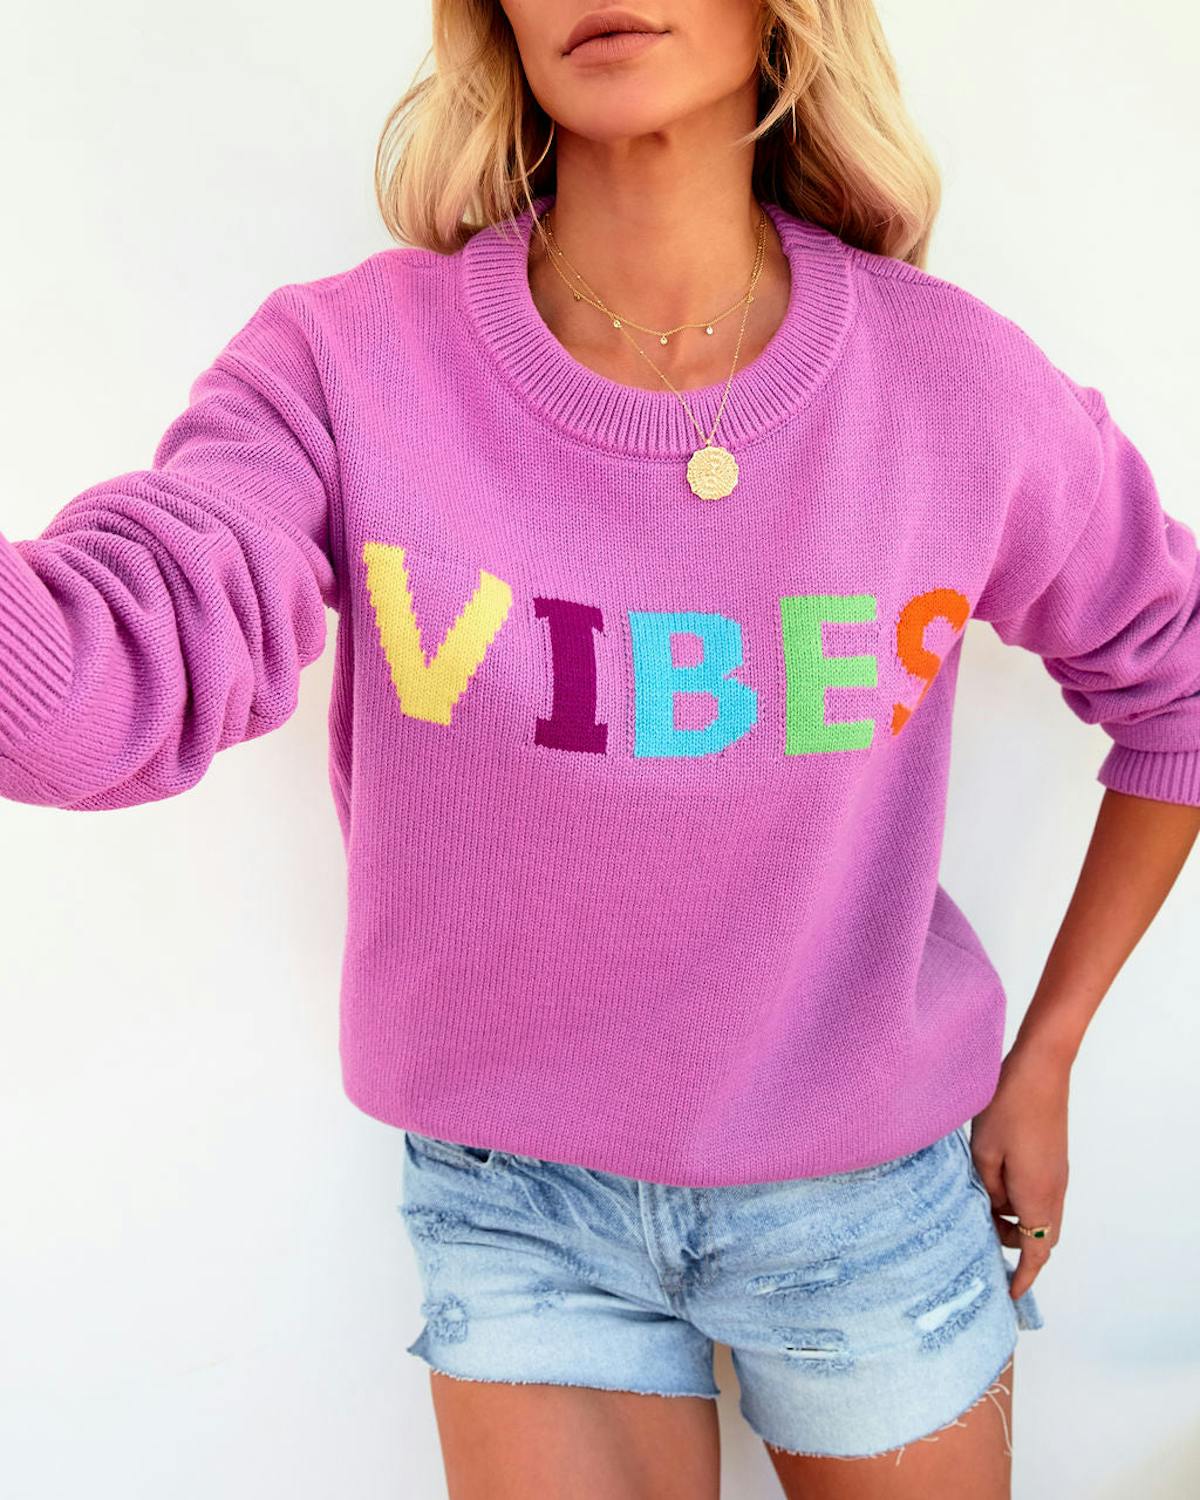 Vibes Cotton Blend Sweater - Orchid - LAST CHANCE view 1